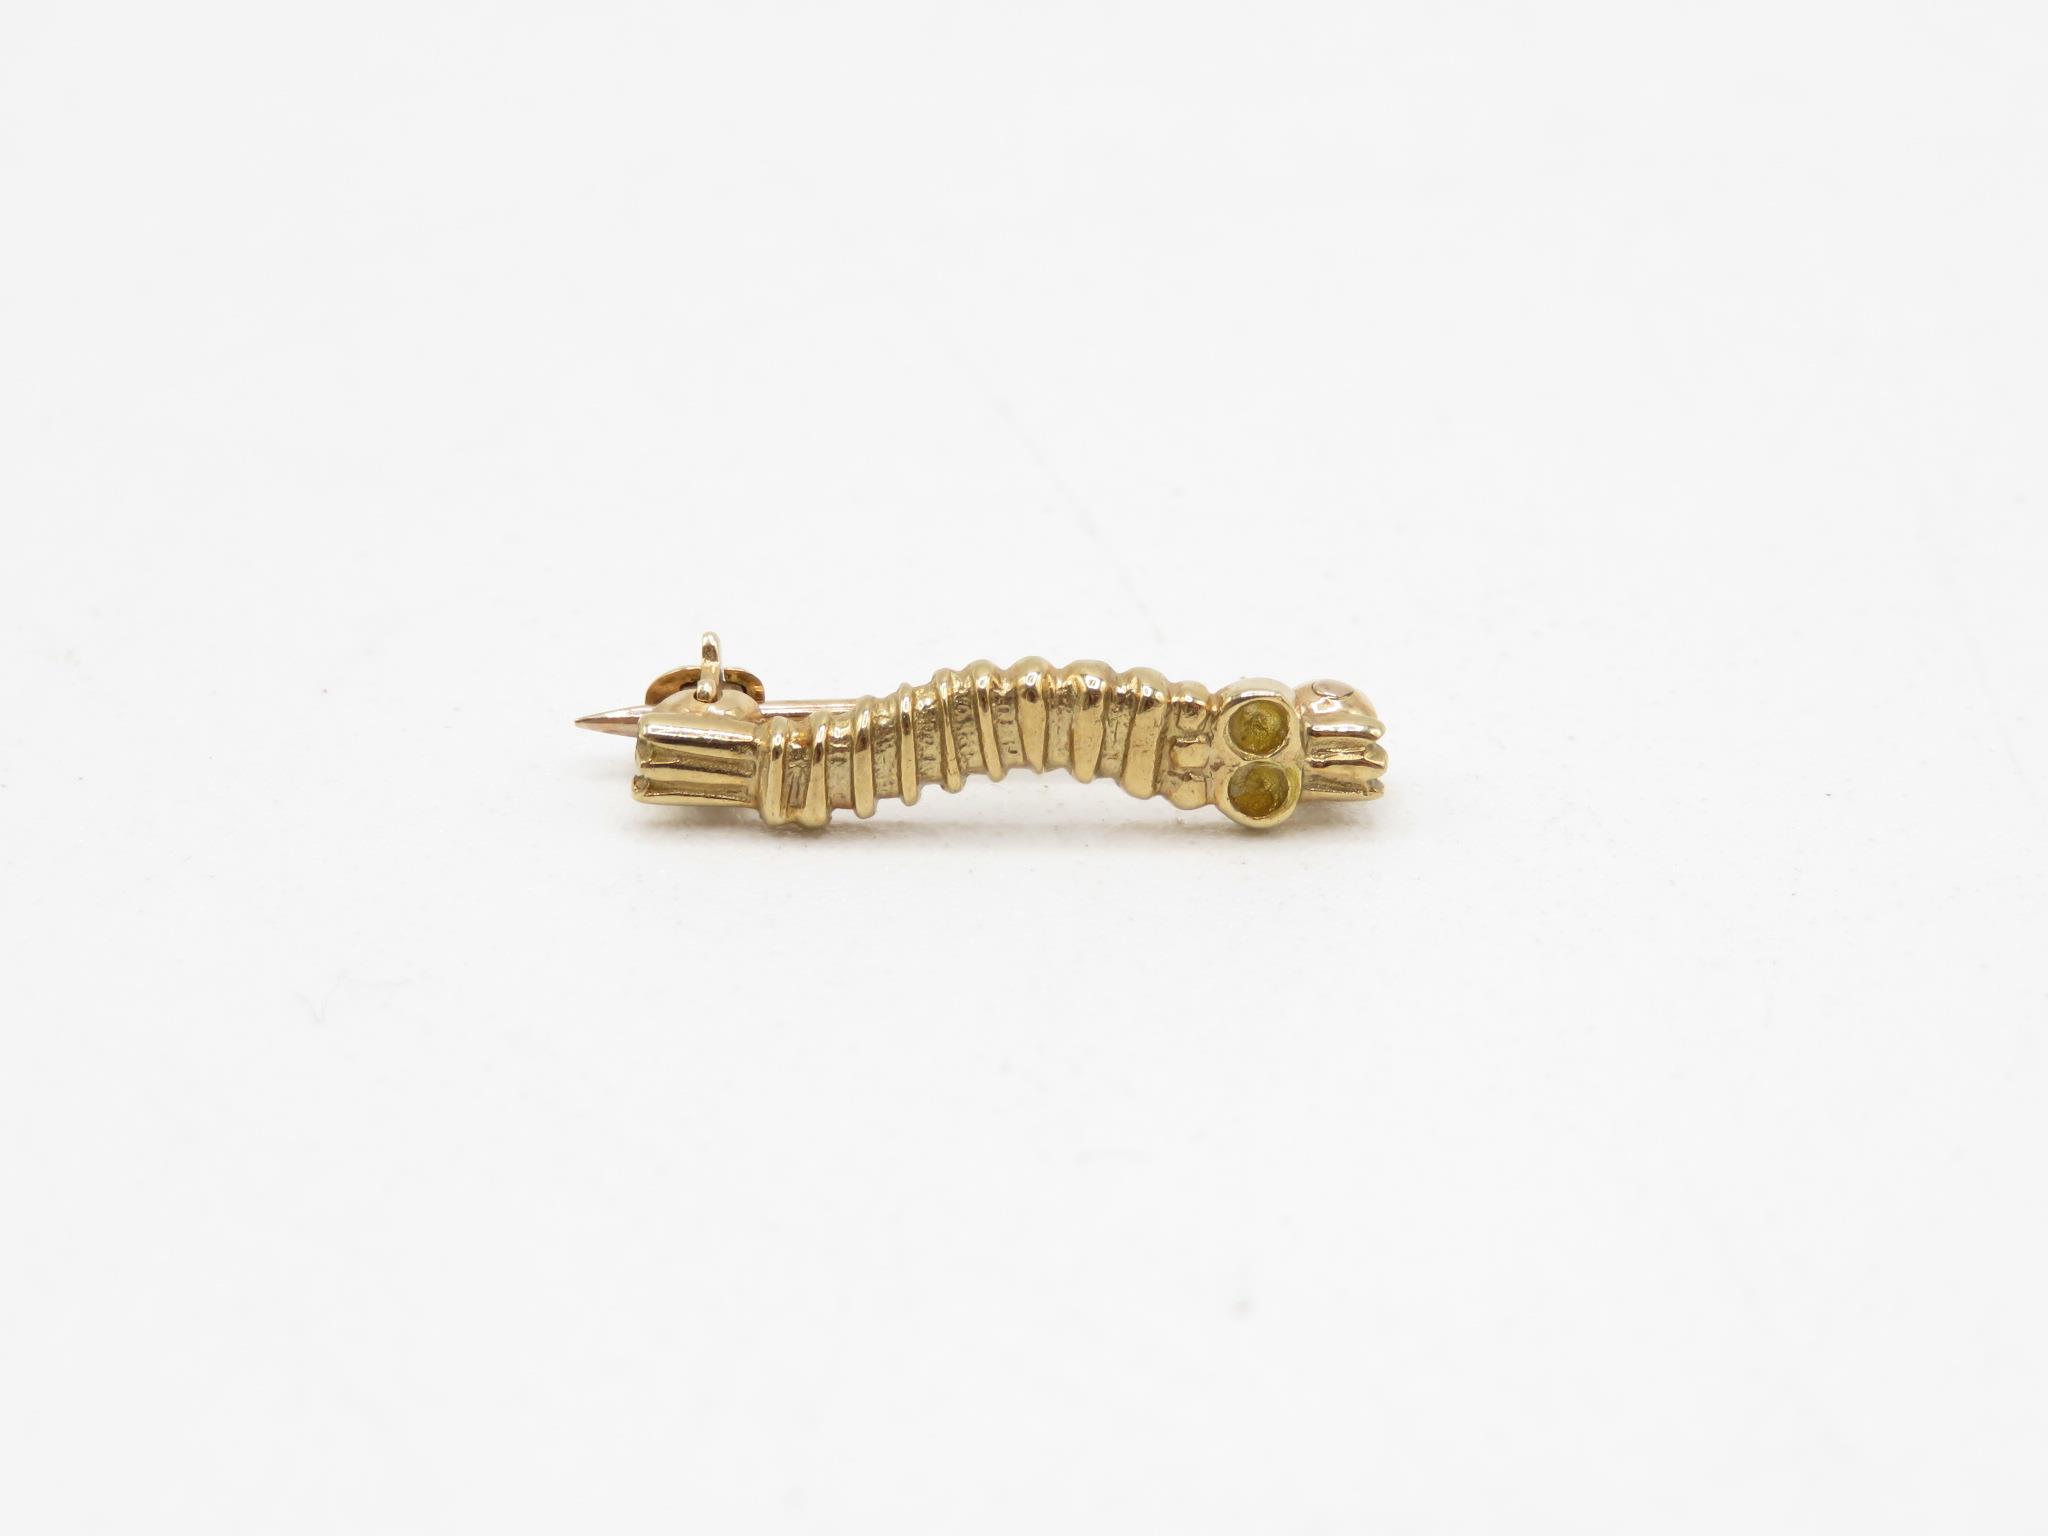 Original gold Caterpillar Club brooch to J Borderson awarded by Caterpillar Club for Parachute